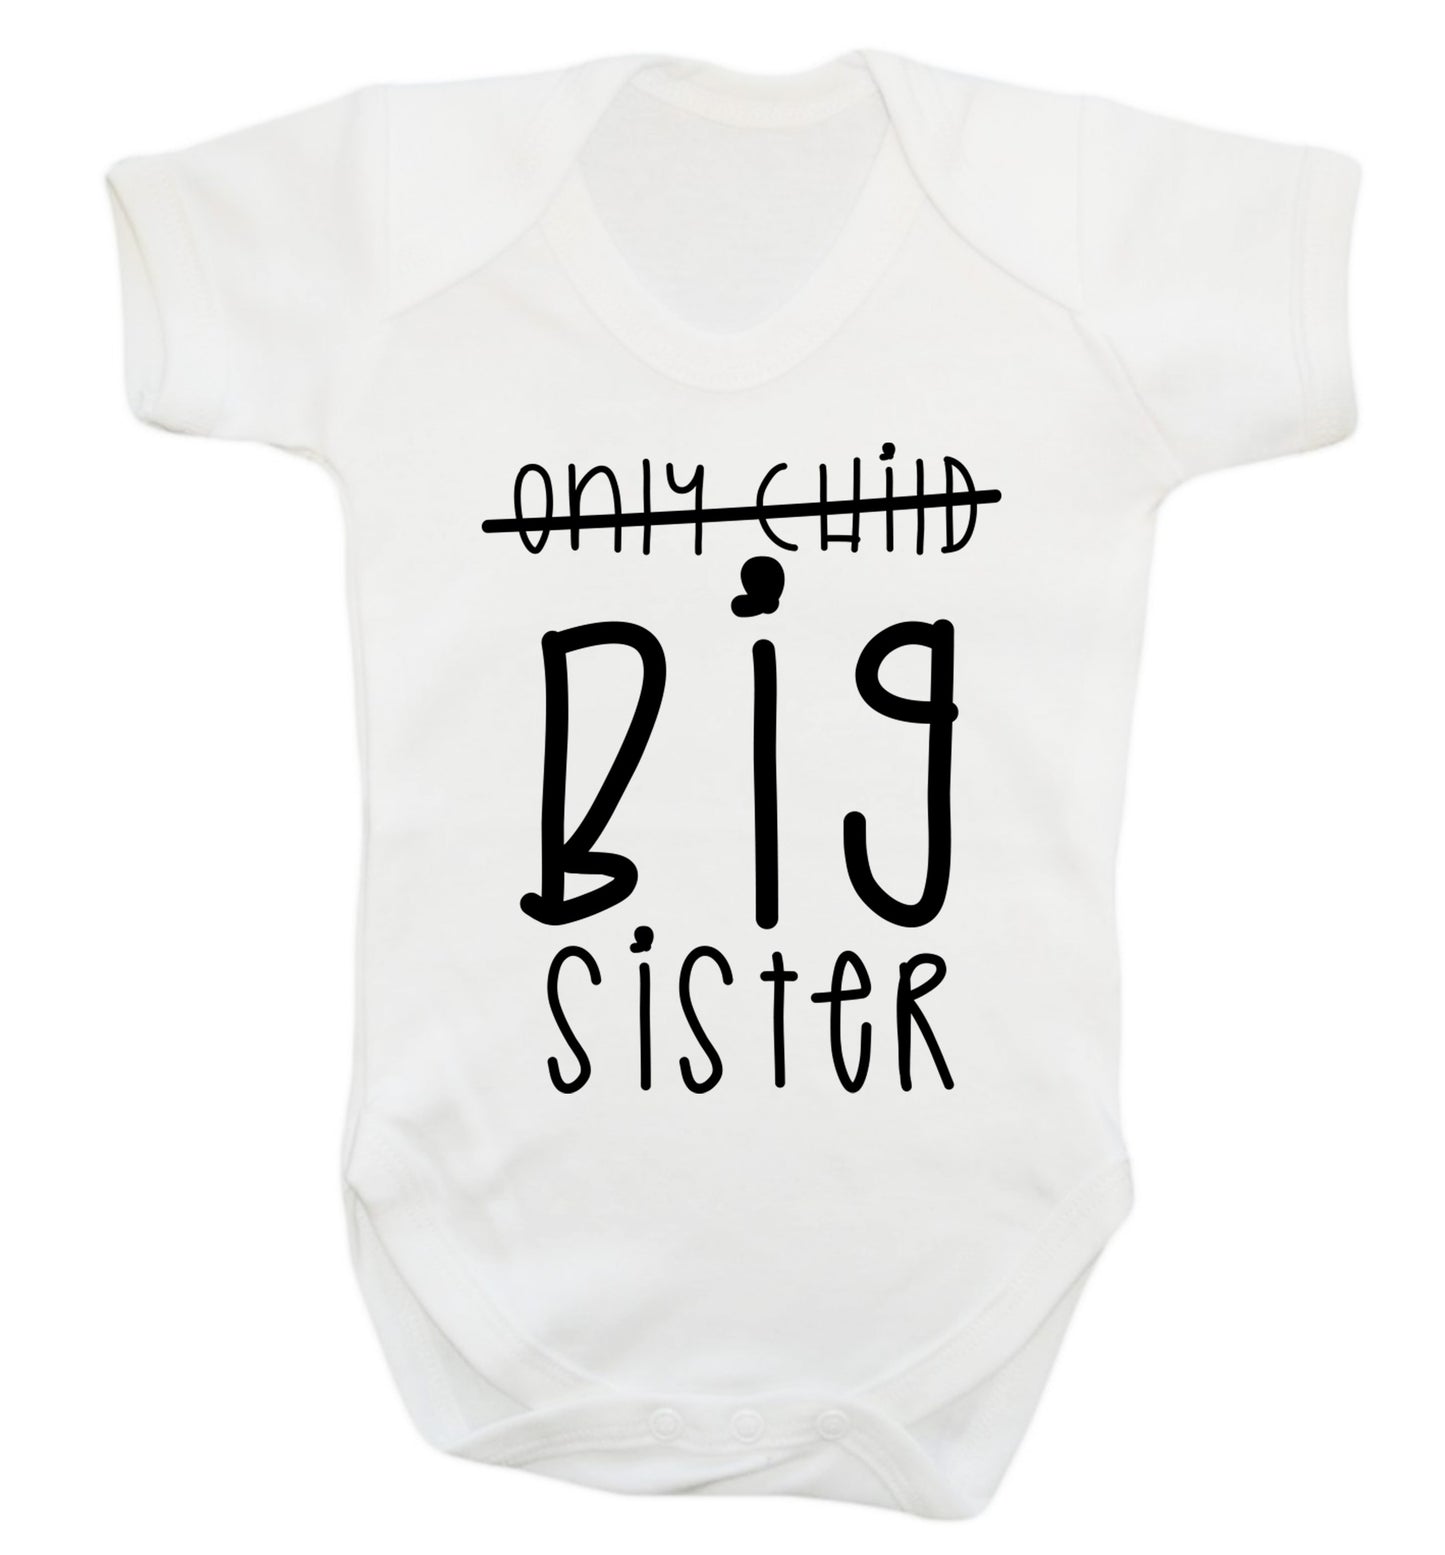 Only child big sister Baby Vest white 18-24 months